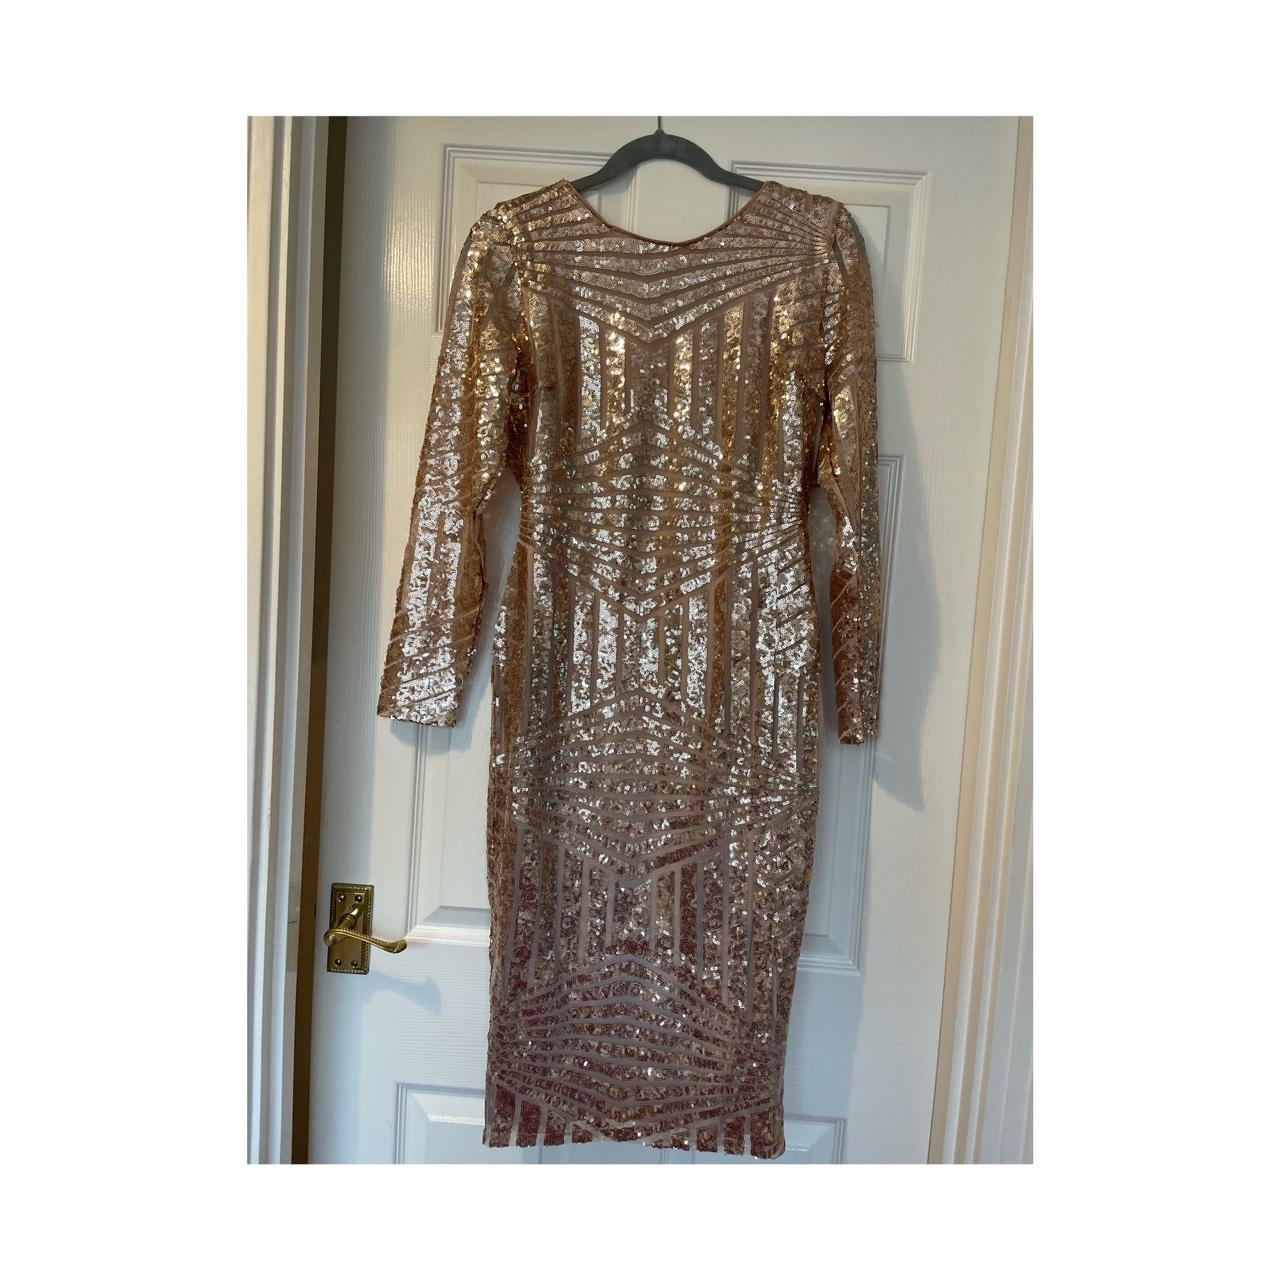 Boohoo rose gold sparkly midi dress brand new with... - Depop